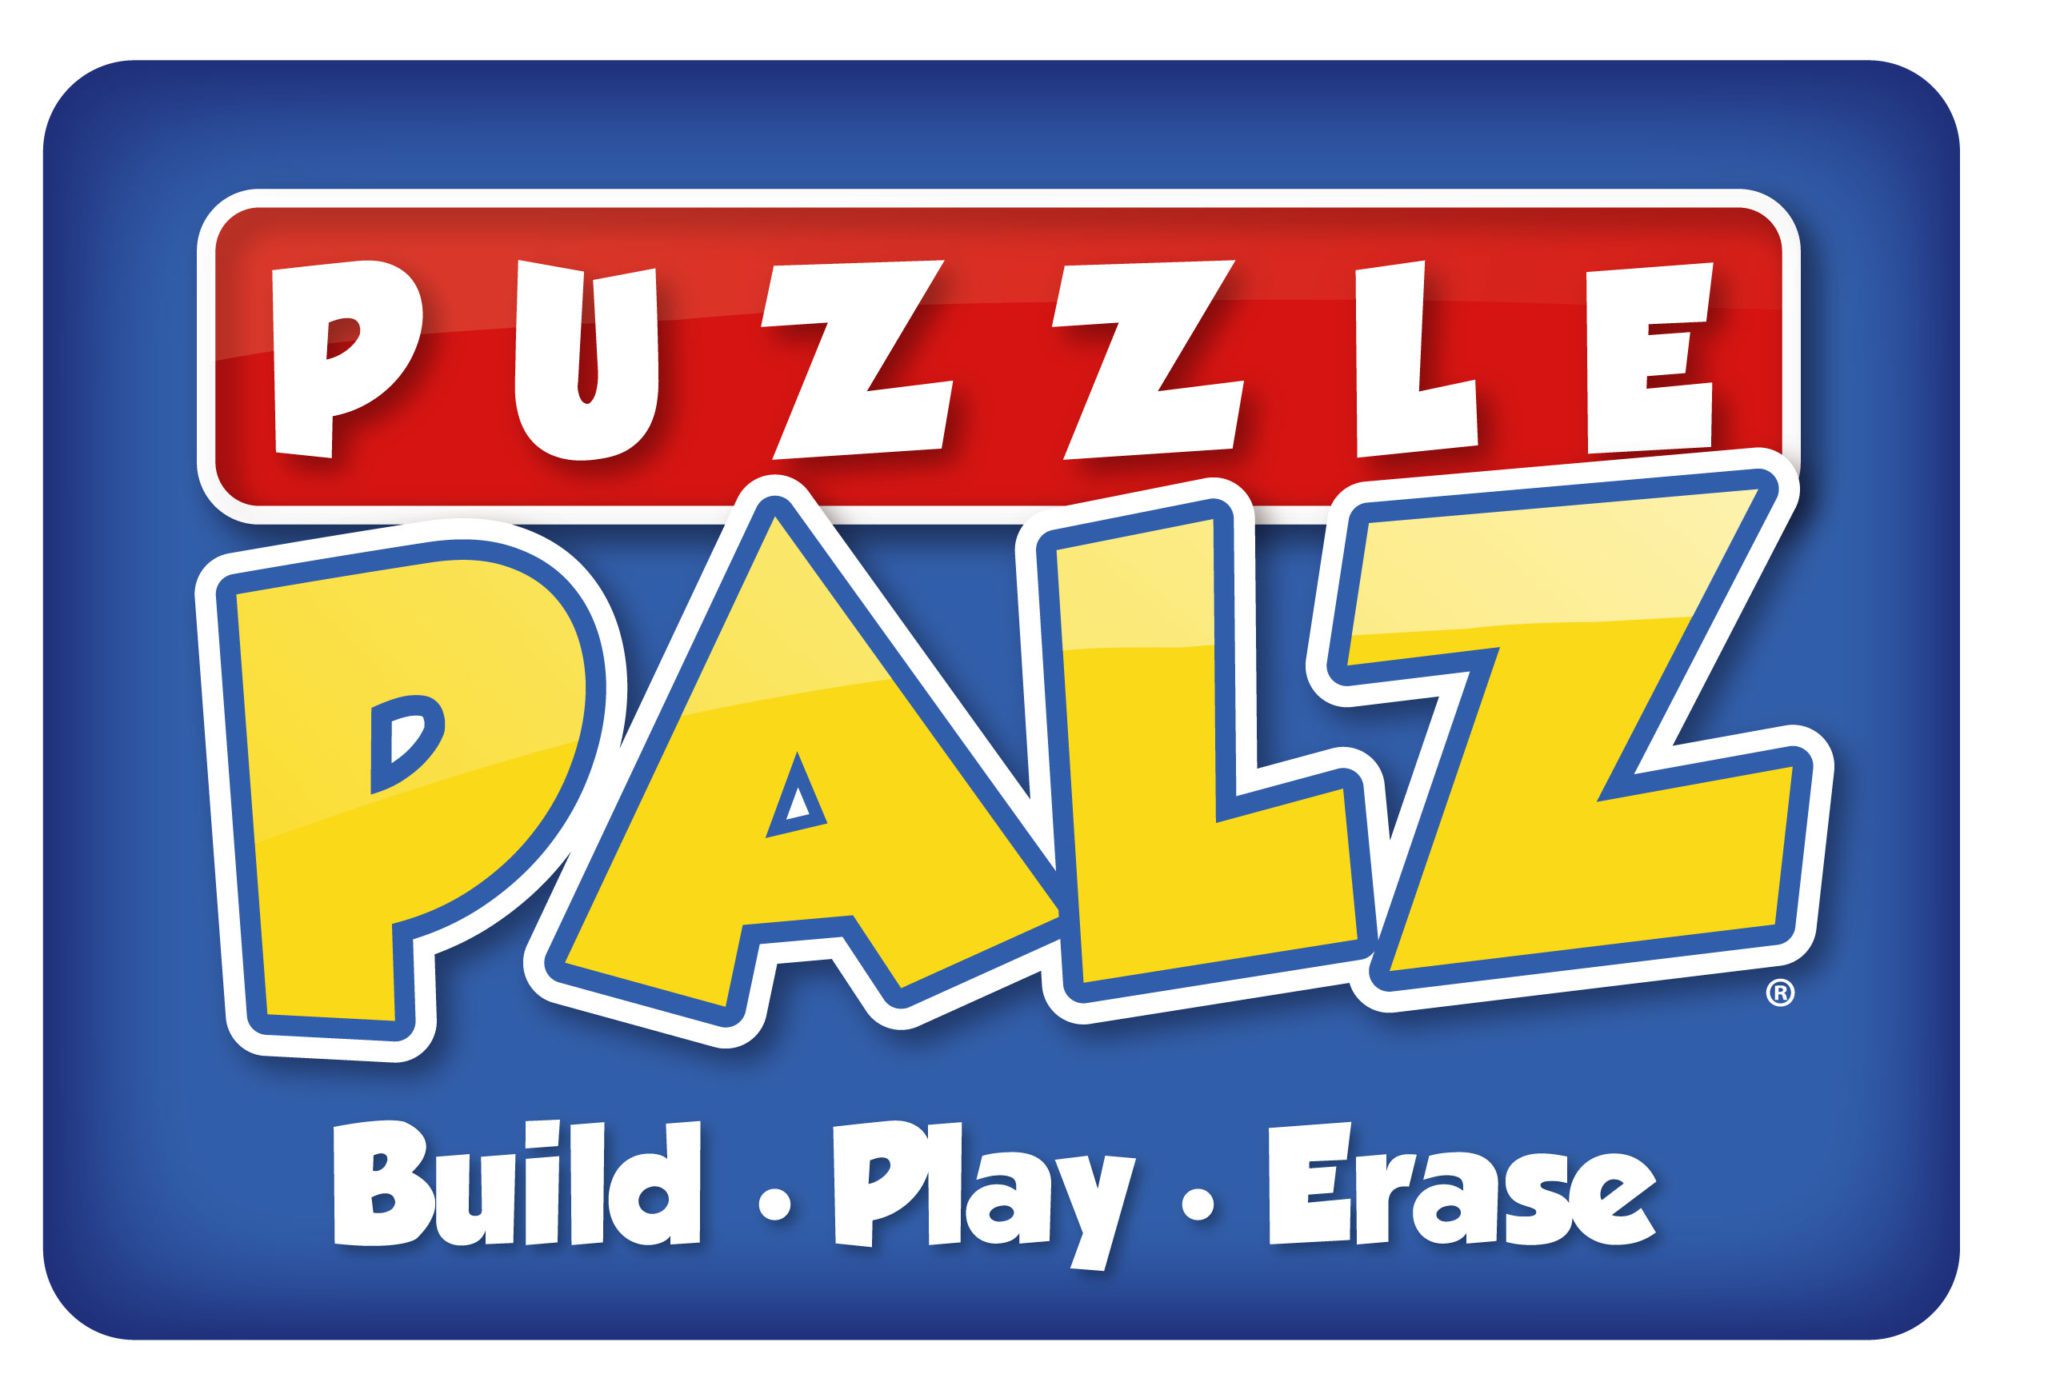 This is an image of the Puzzle Palz logo.